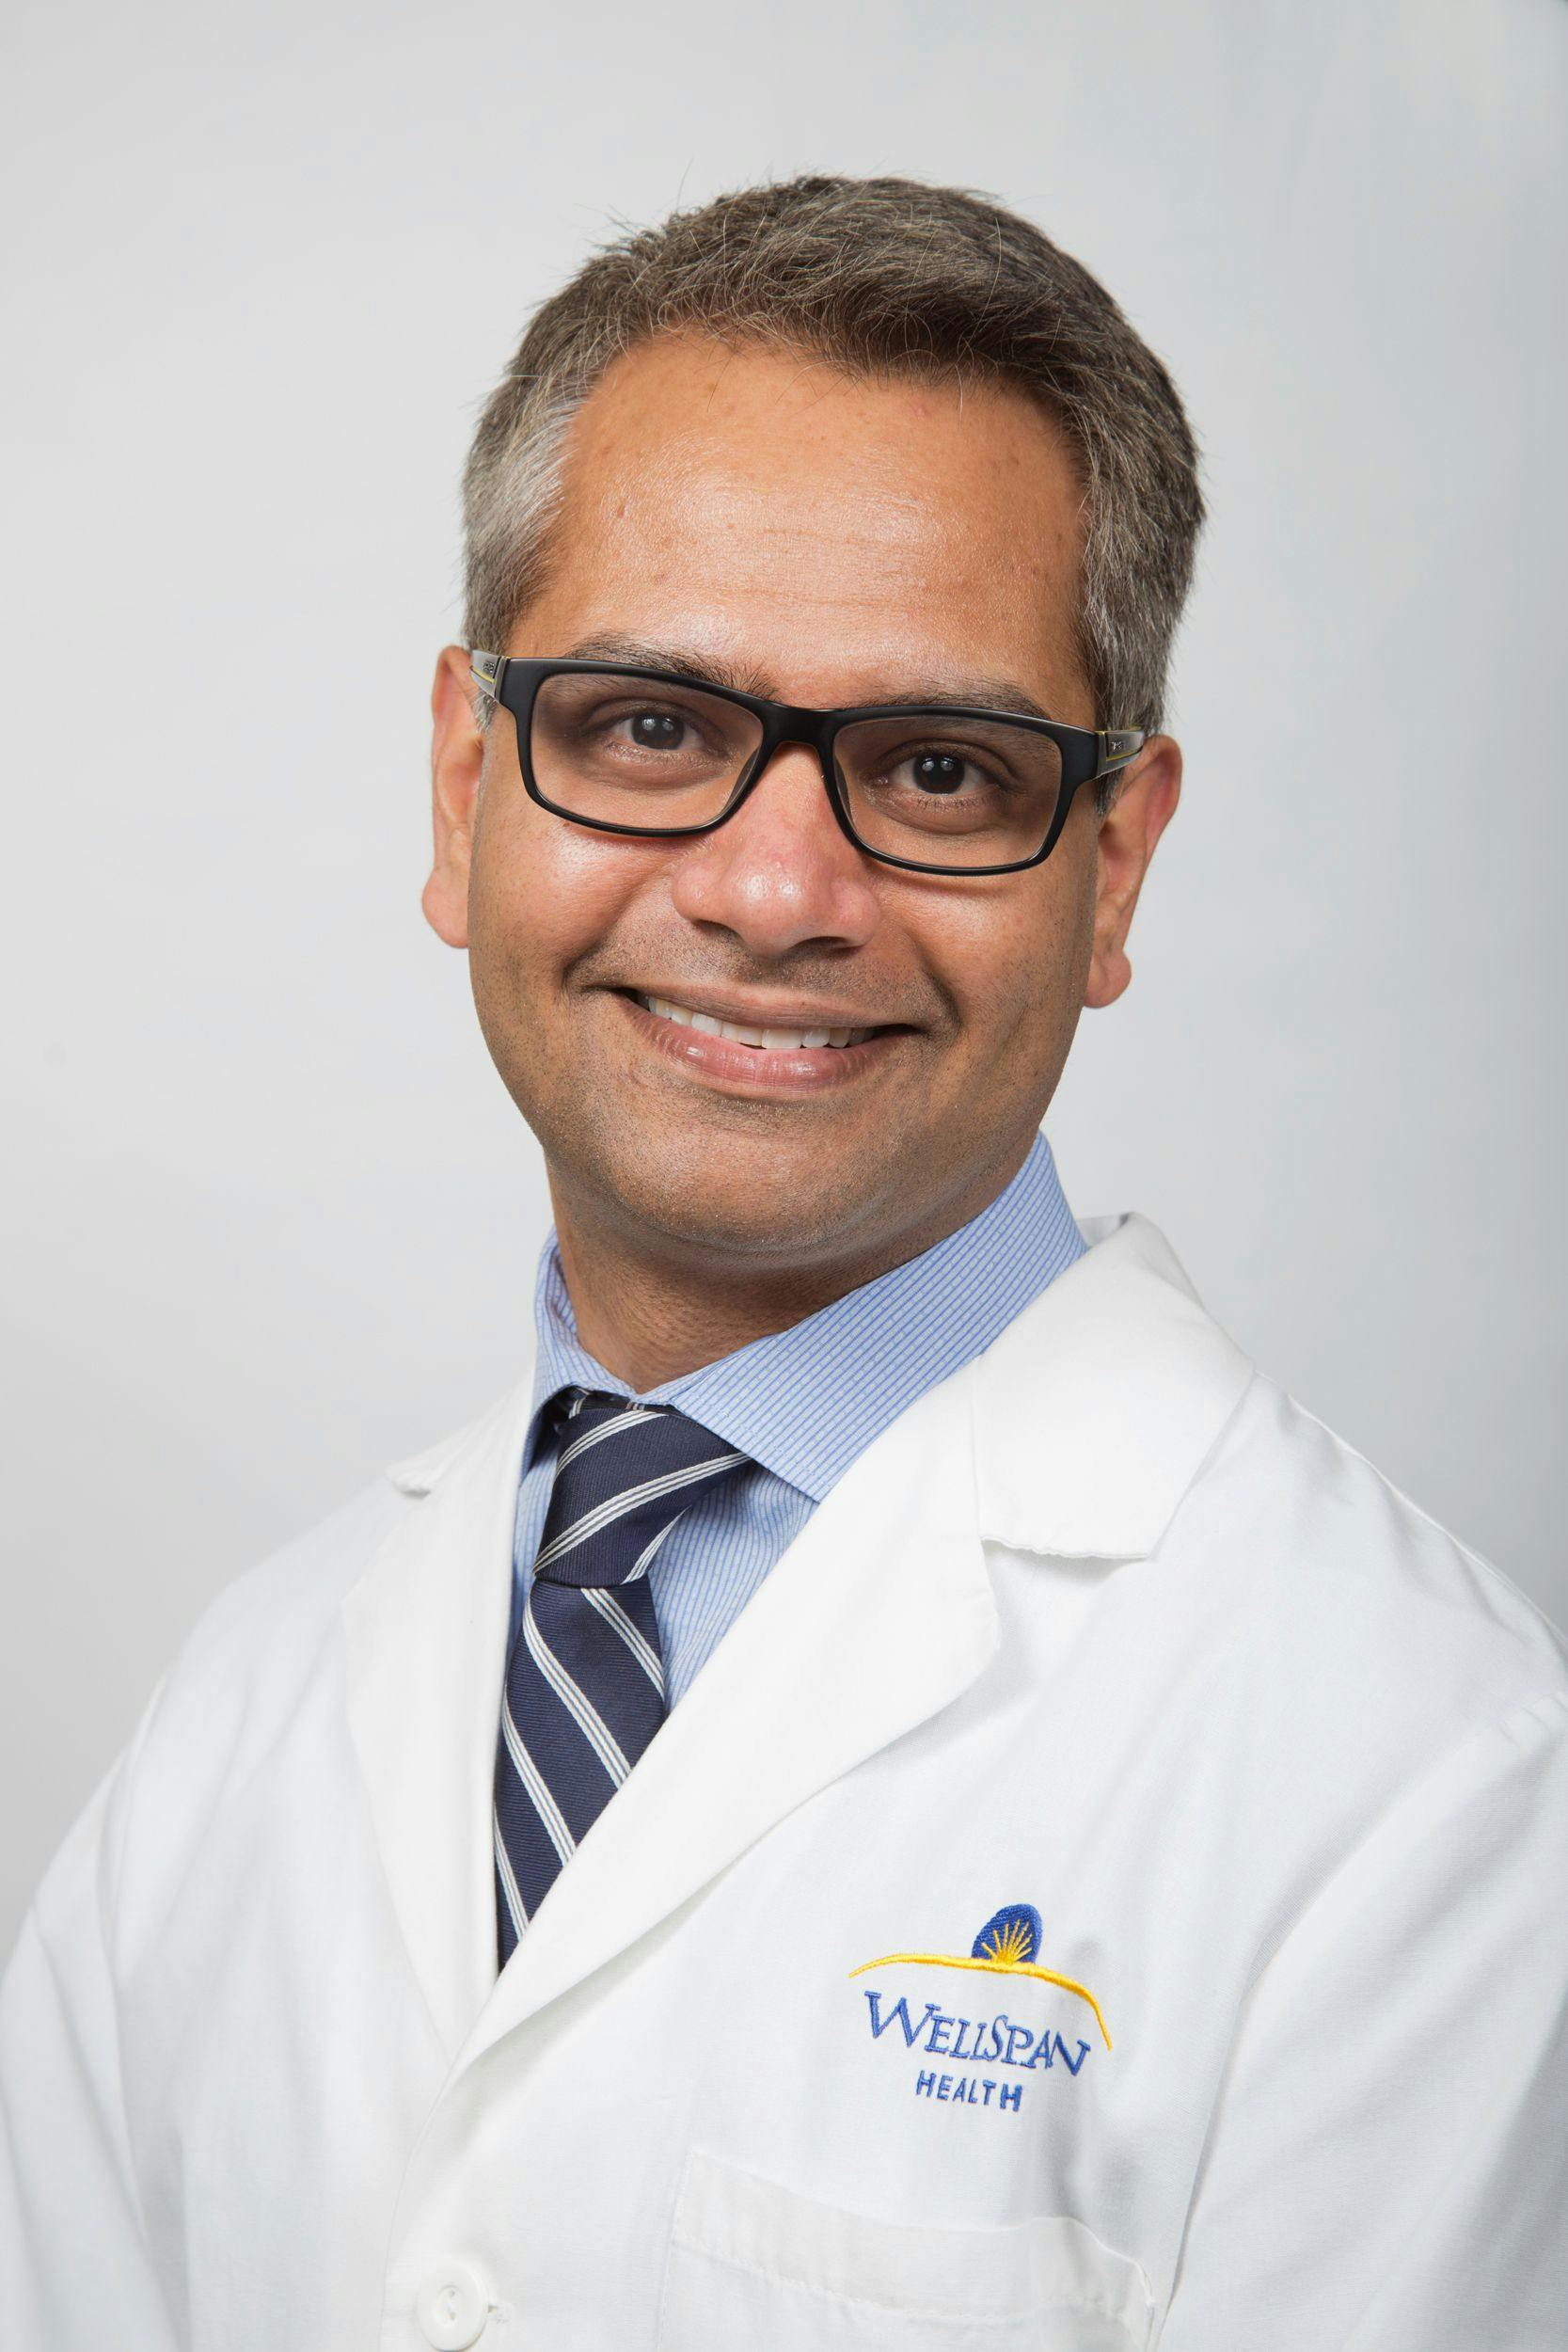 Vipul Bhatia, WellSpan Health's associate chief medical officer of post-acute and continuing care services 


